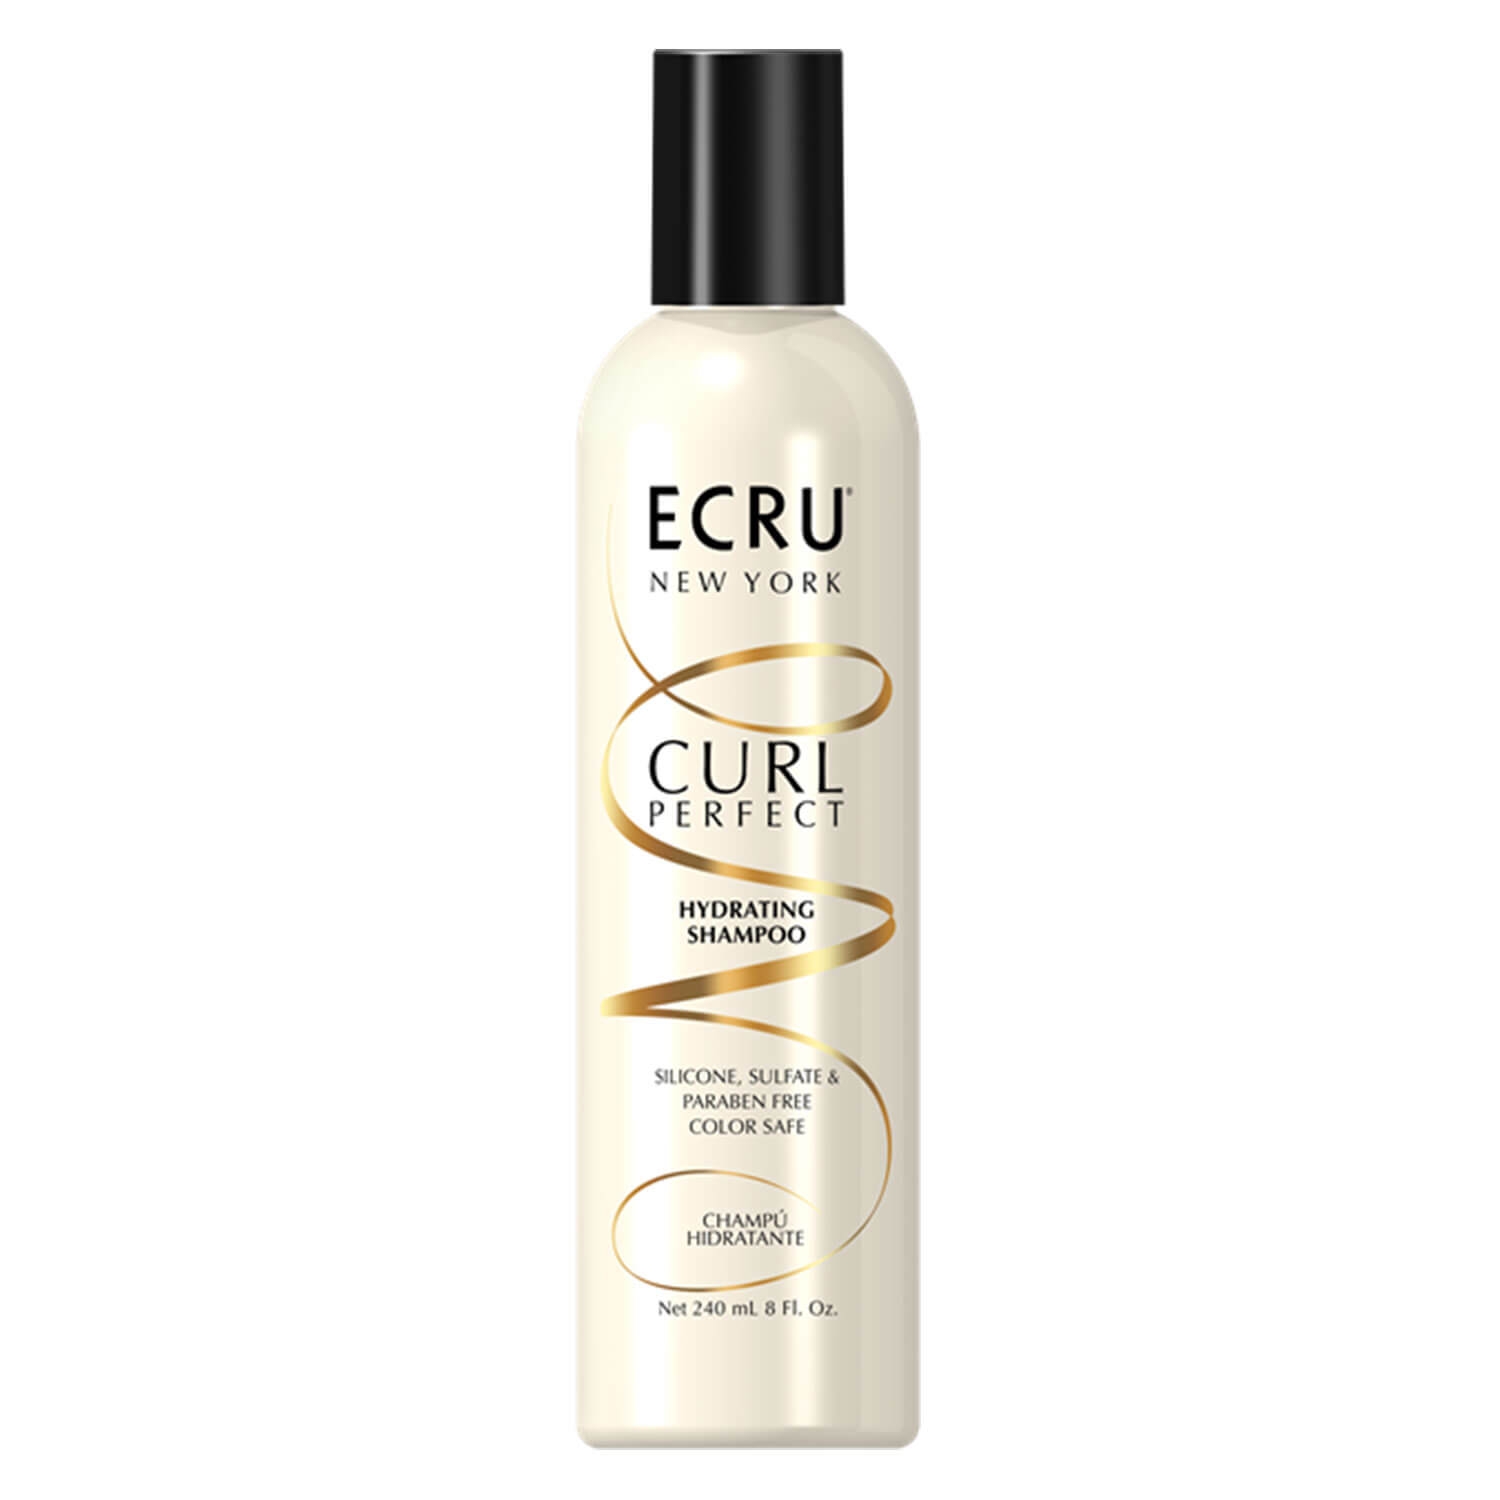 Product image from Ecru Curl Perfect - Hydrating Shampoo